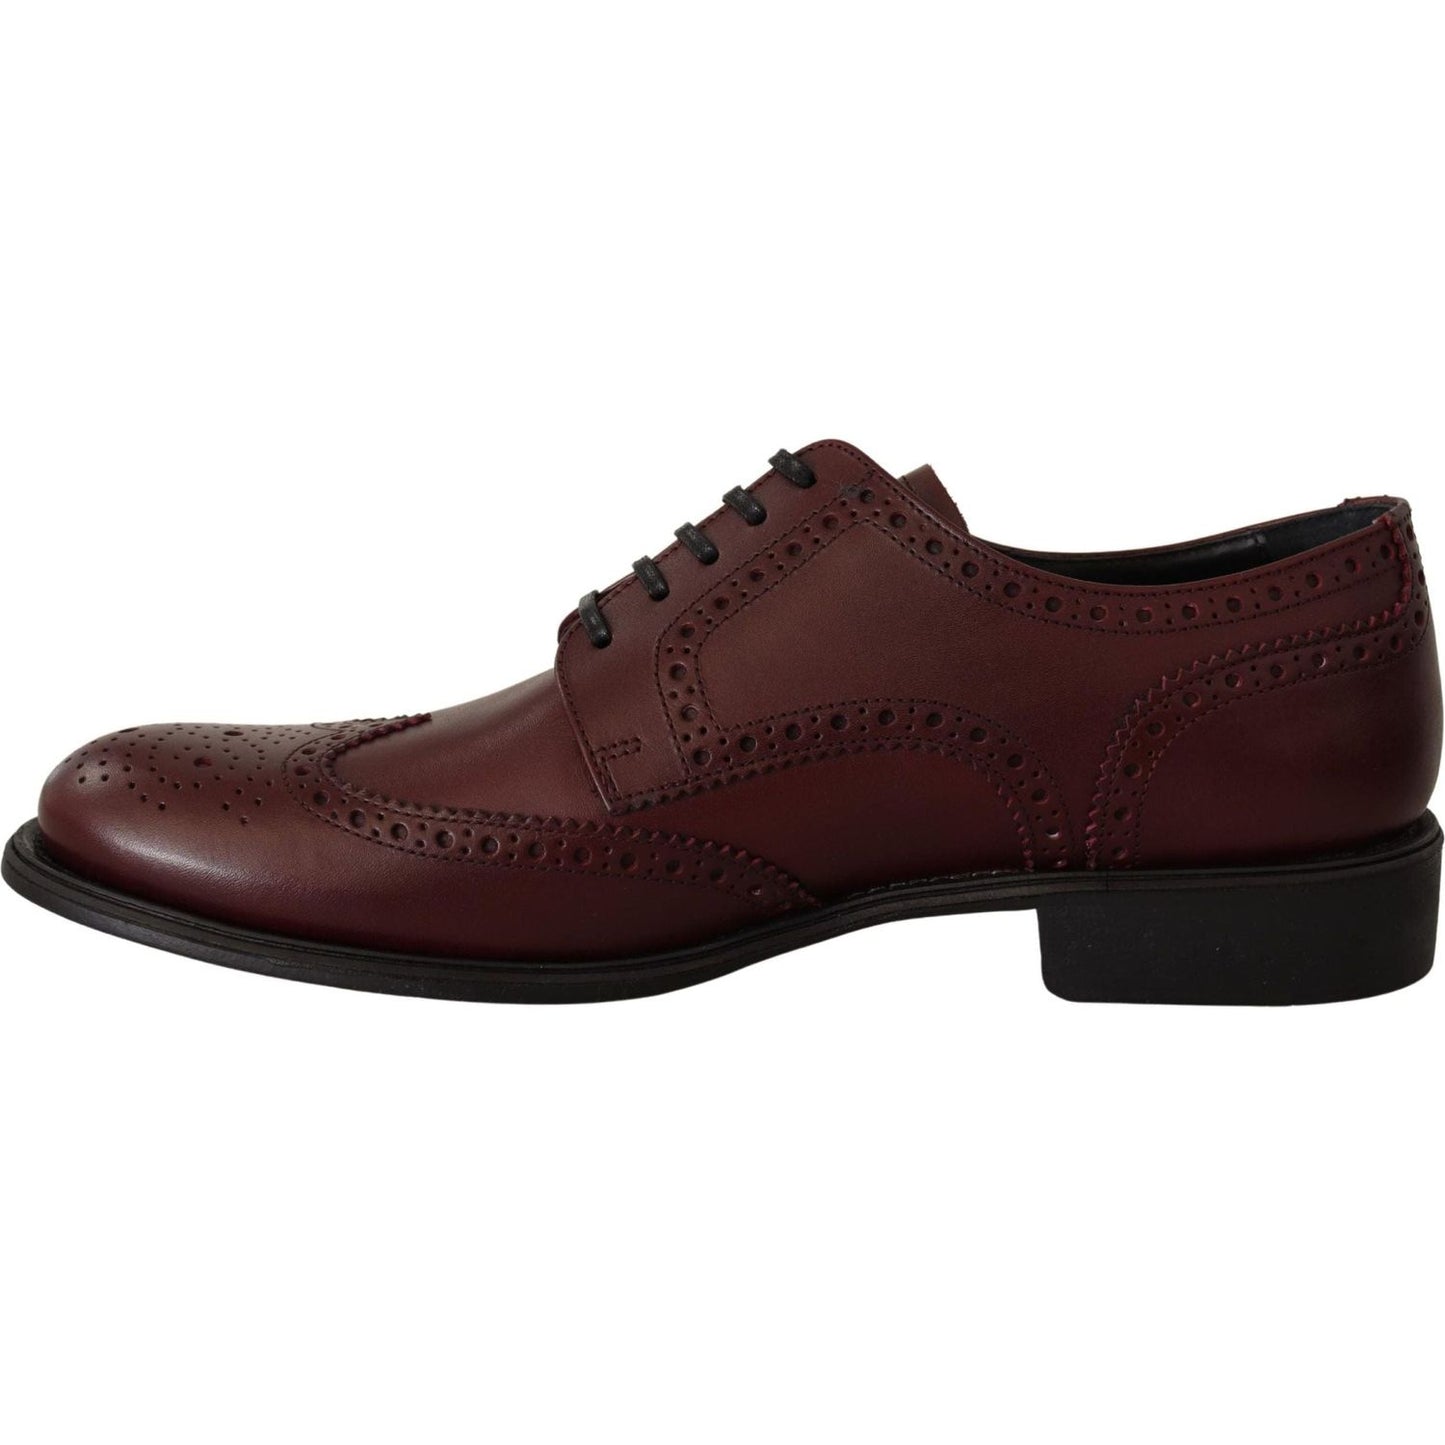 Dolce & Gabbana Elegant Bordeaux Leather Derby Shoes bordeaux-leather-oxford-wingtip-formal-shoes IMG_4870-scaled-398f75f3-3ac.jpg